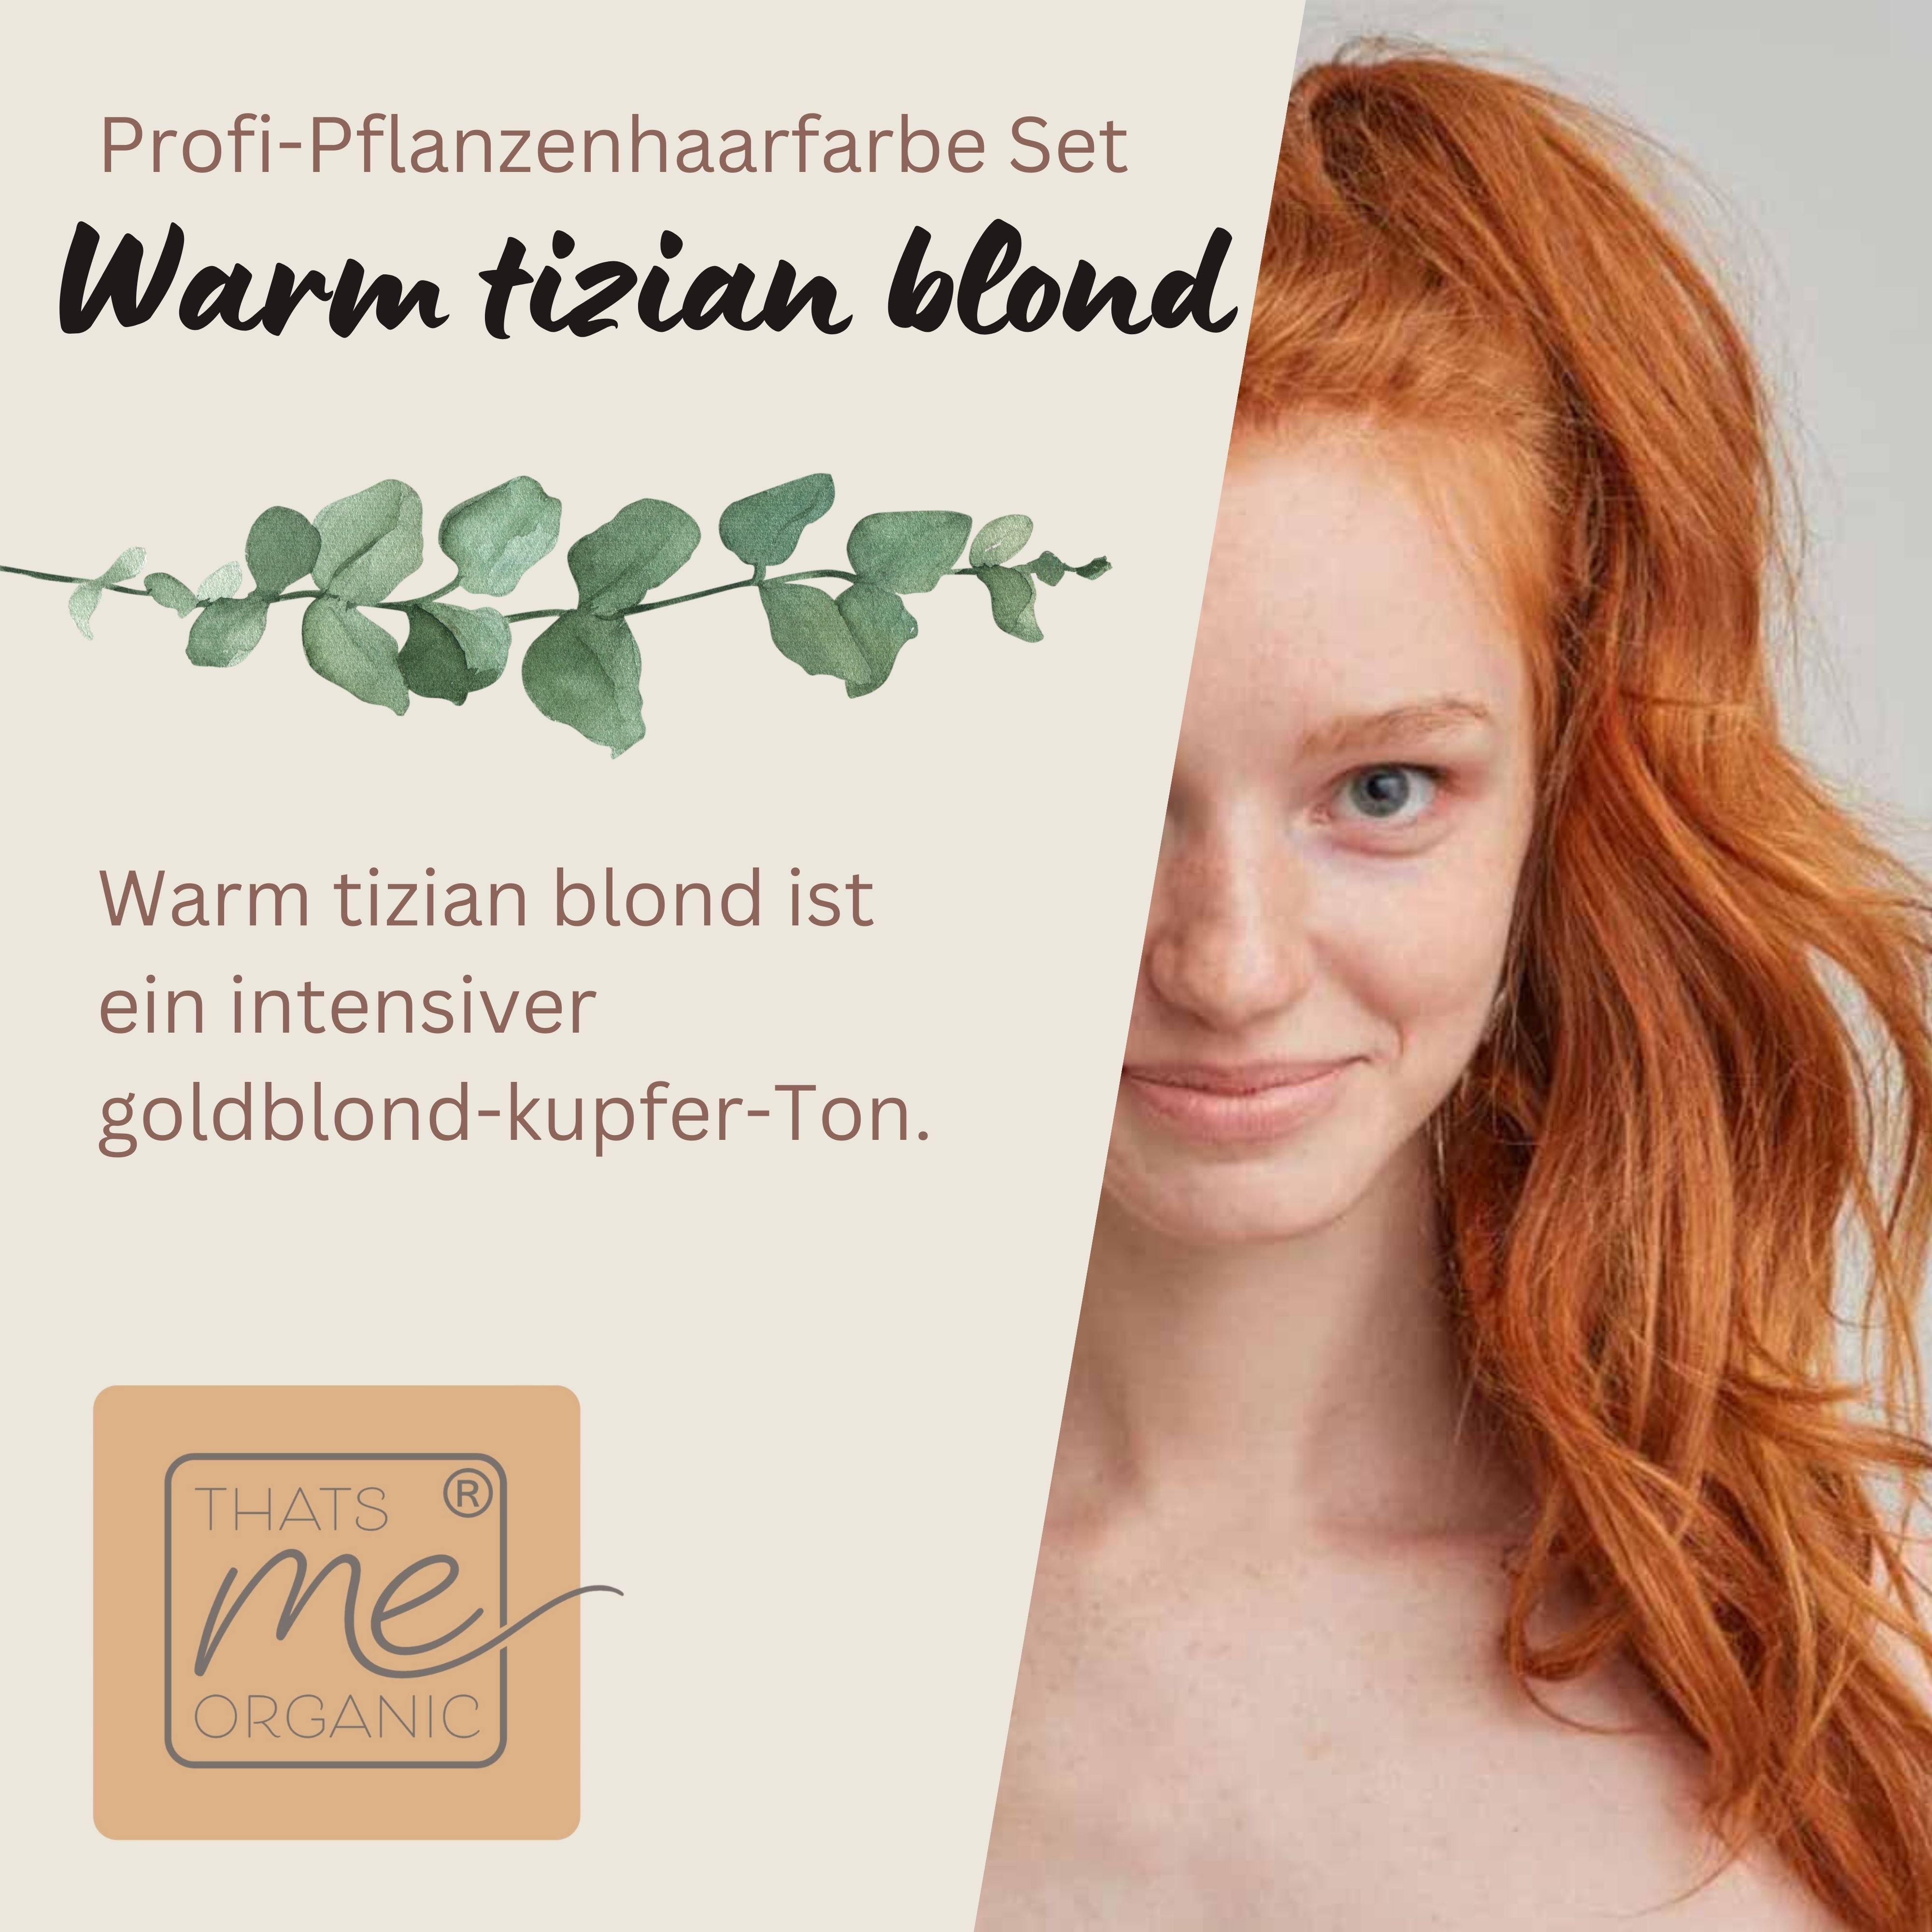 Professional plant hair color "warm light copper blonde - warm titian blonde" 90g refill pack